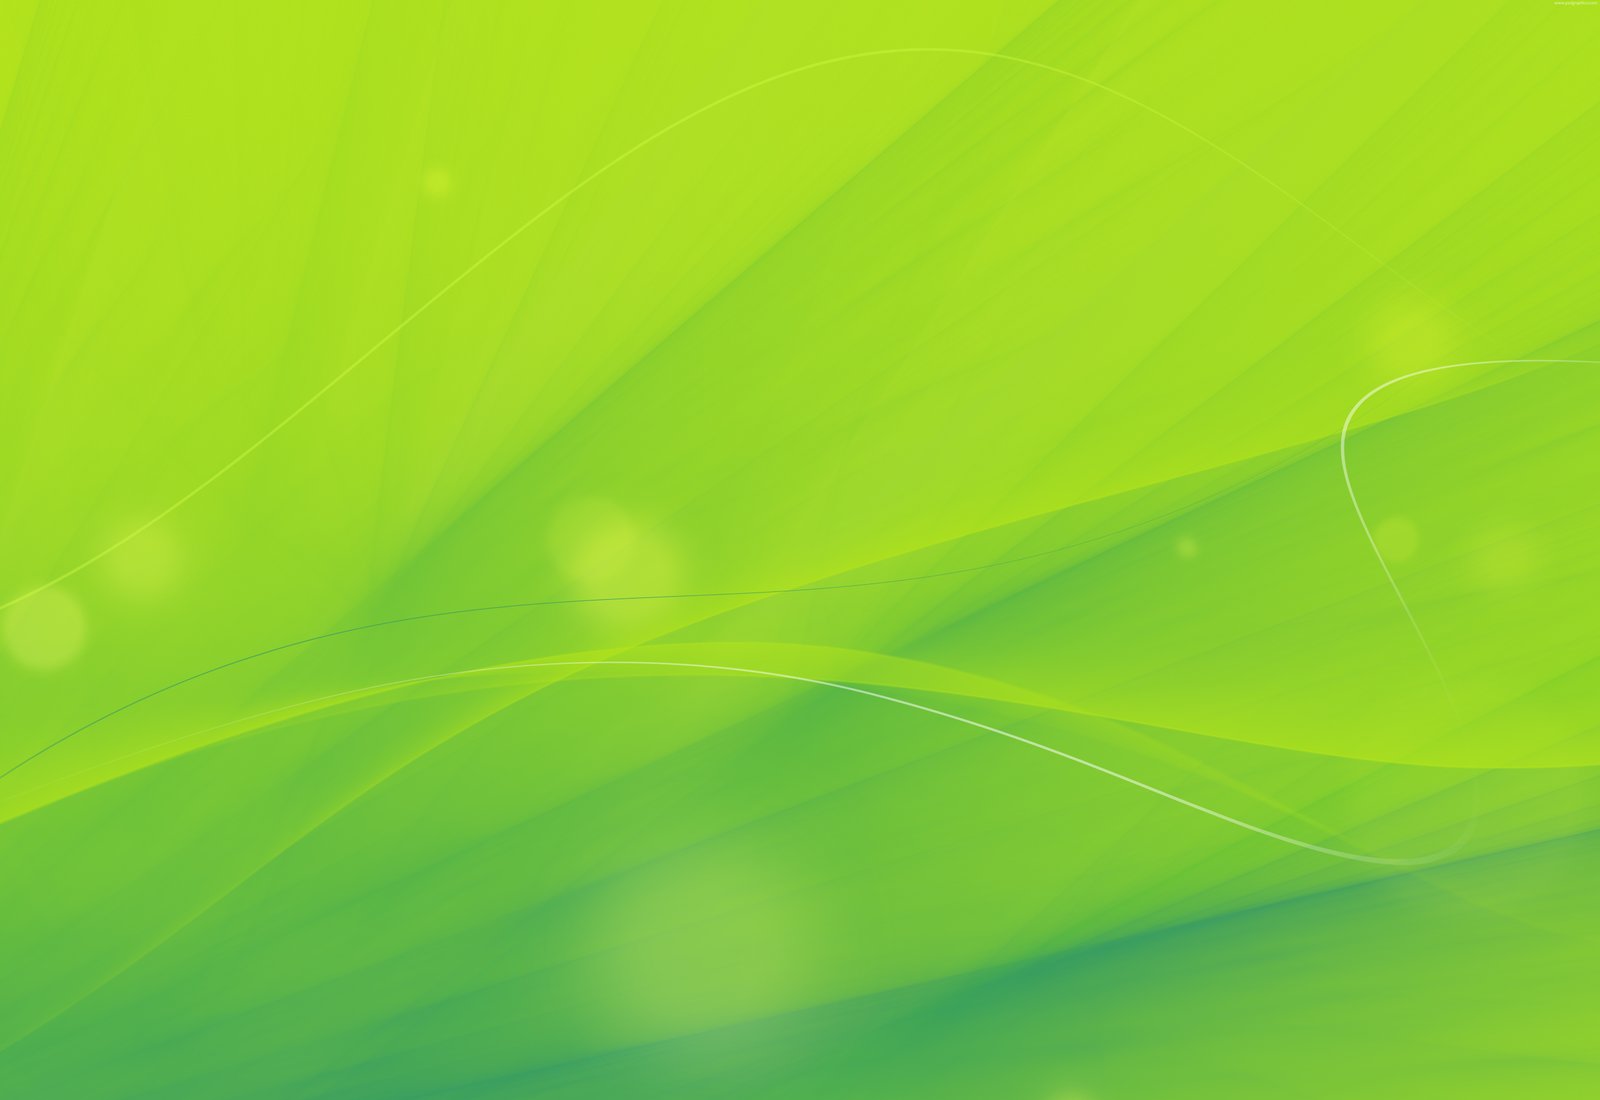 Lime green background - PSDgraphics